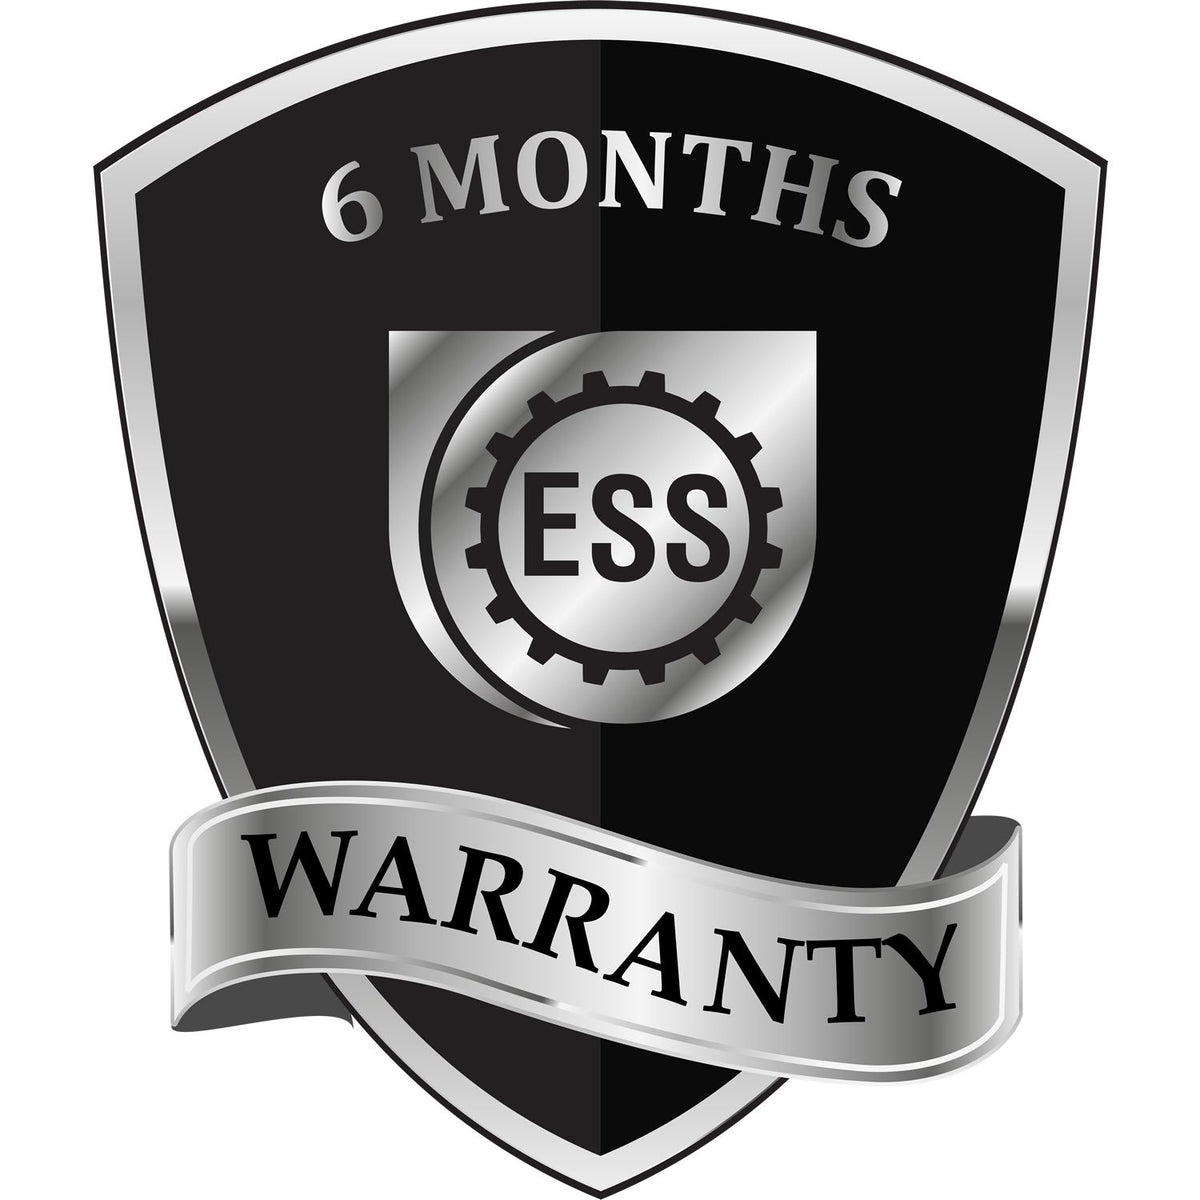 A black and silver badge or emblem showing warranty information for the Pennsylvania Professional Geologist Seal Stamp